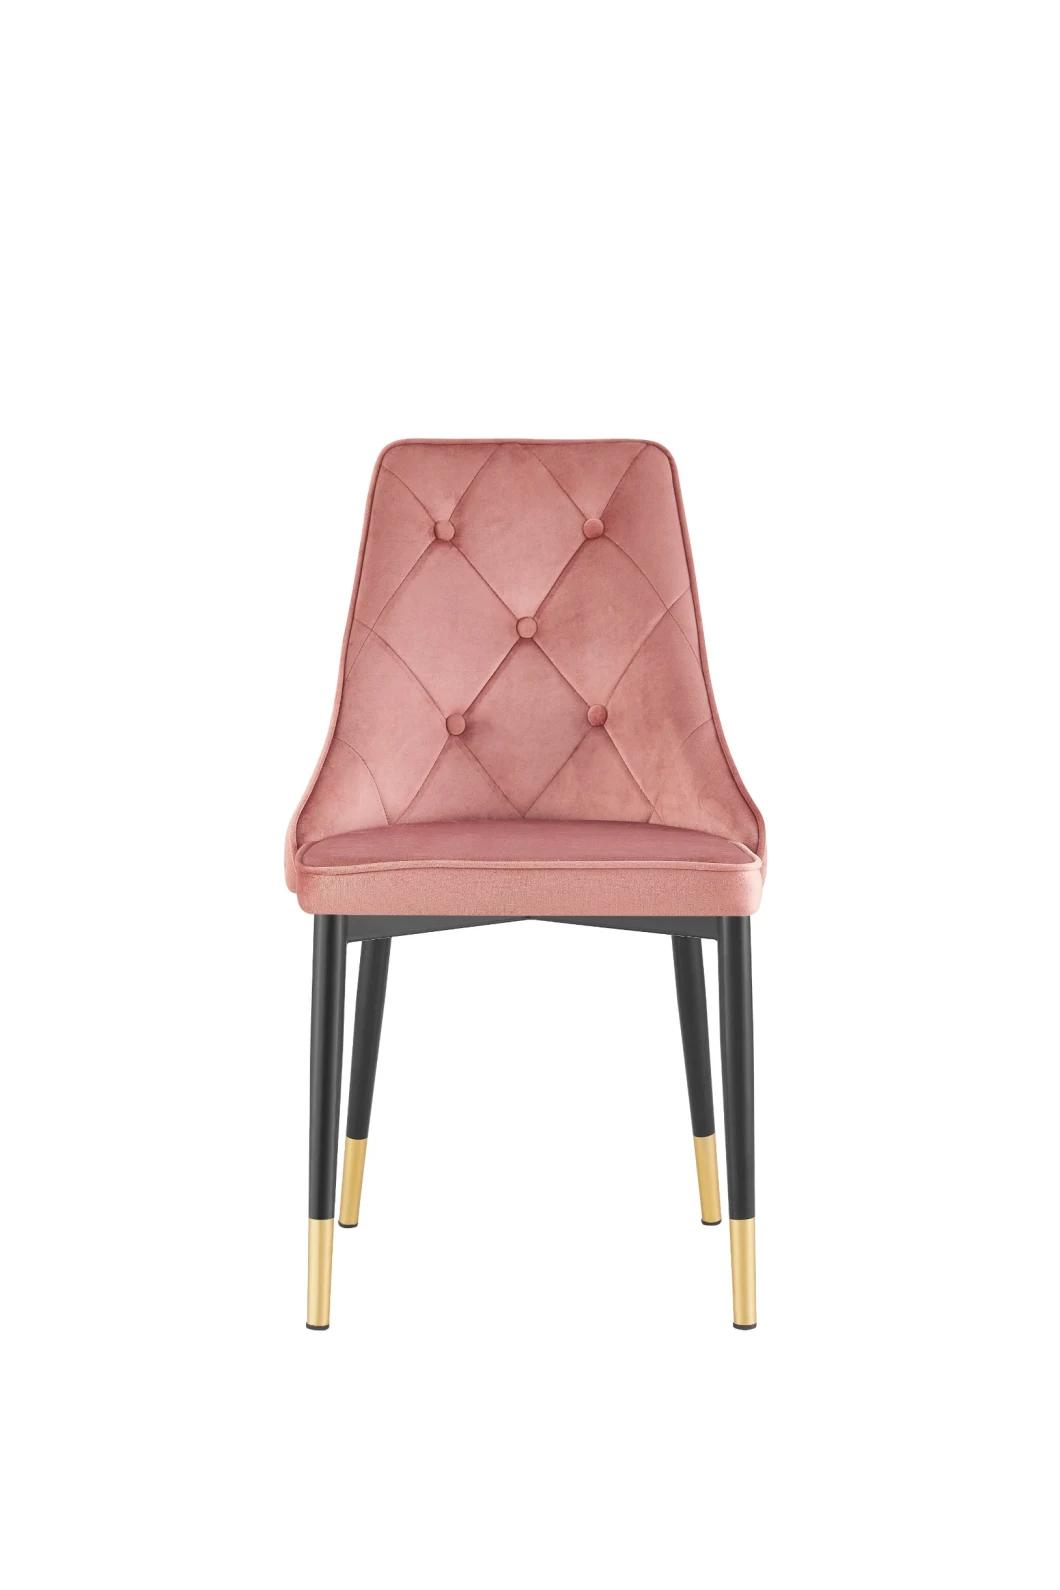 Hot-Selling Latest Style Metal Chair Velvet Wrapped Dining Chair for Dining Room Furniture